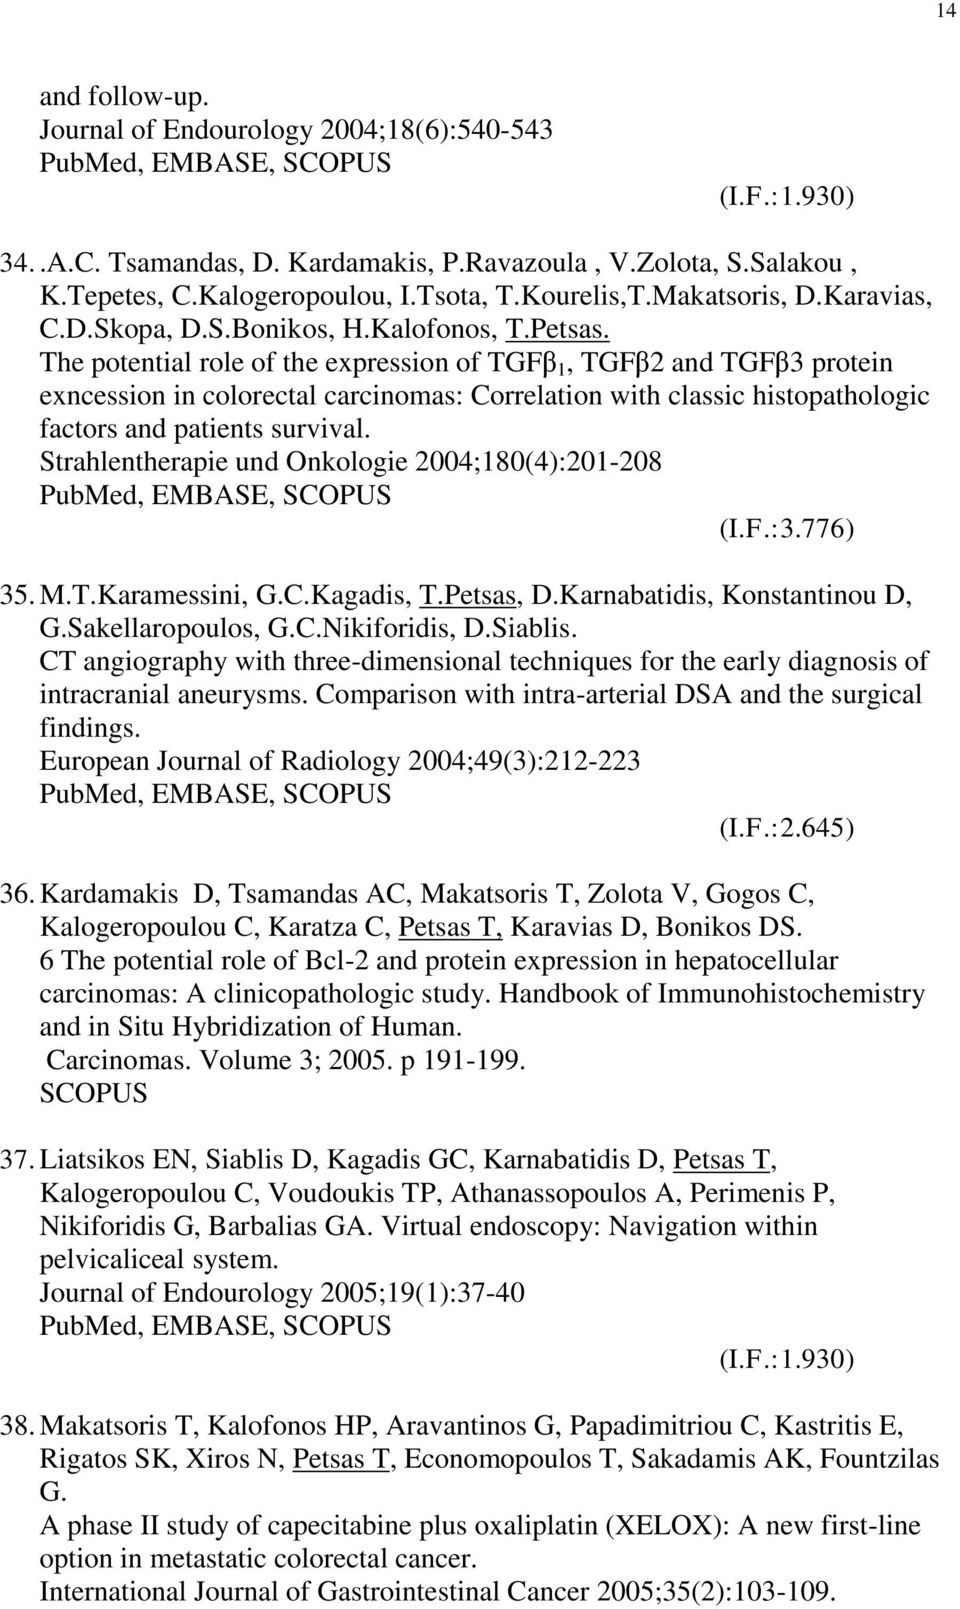 The potential role of the expression of TGFβ 1, TGFβ2 and TGFβ3 protein exncession in colorectal carcinomas: Correlation with classic histopathologic factors and patients survival.